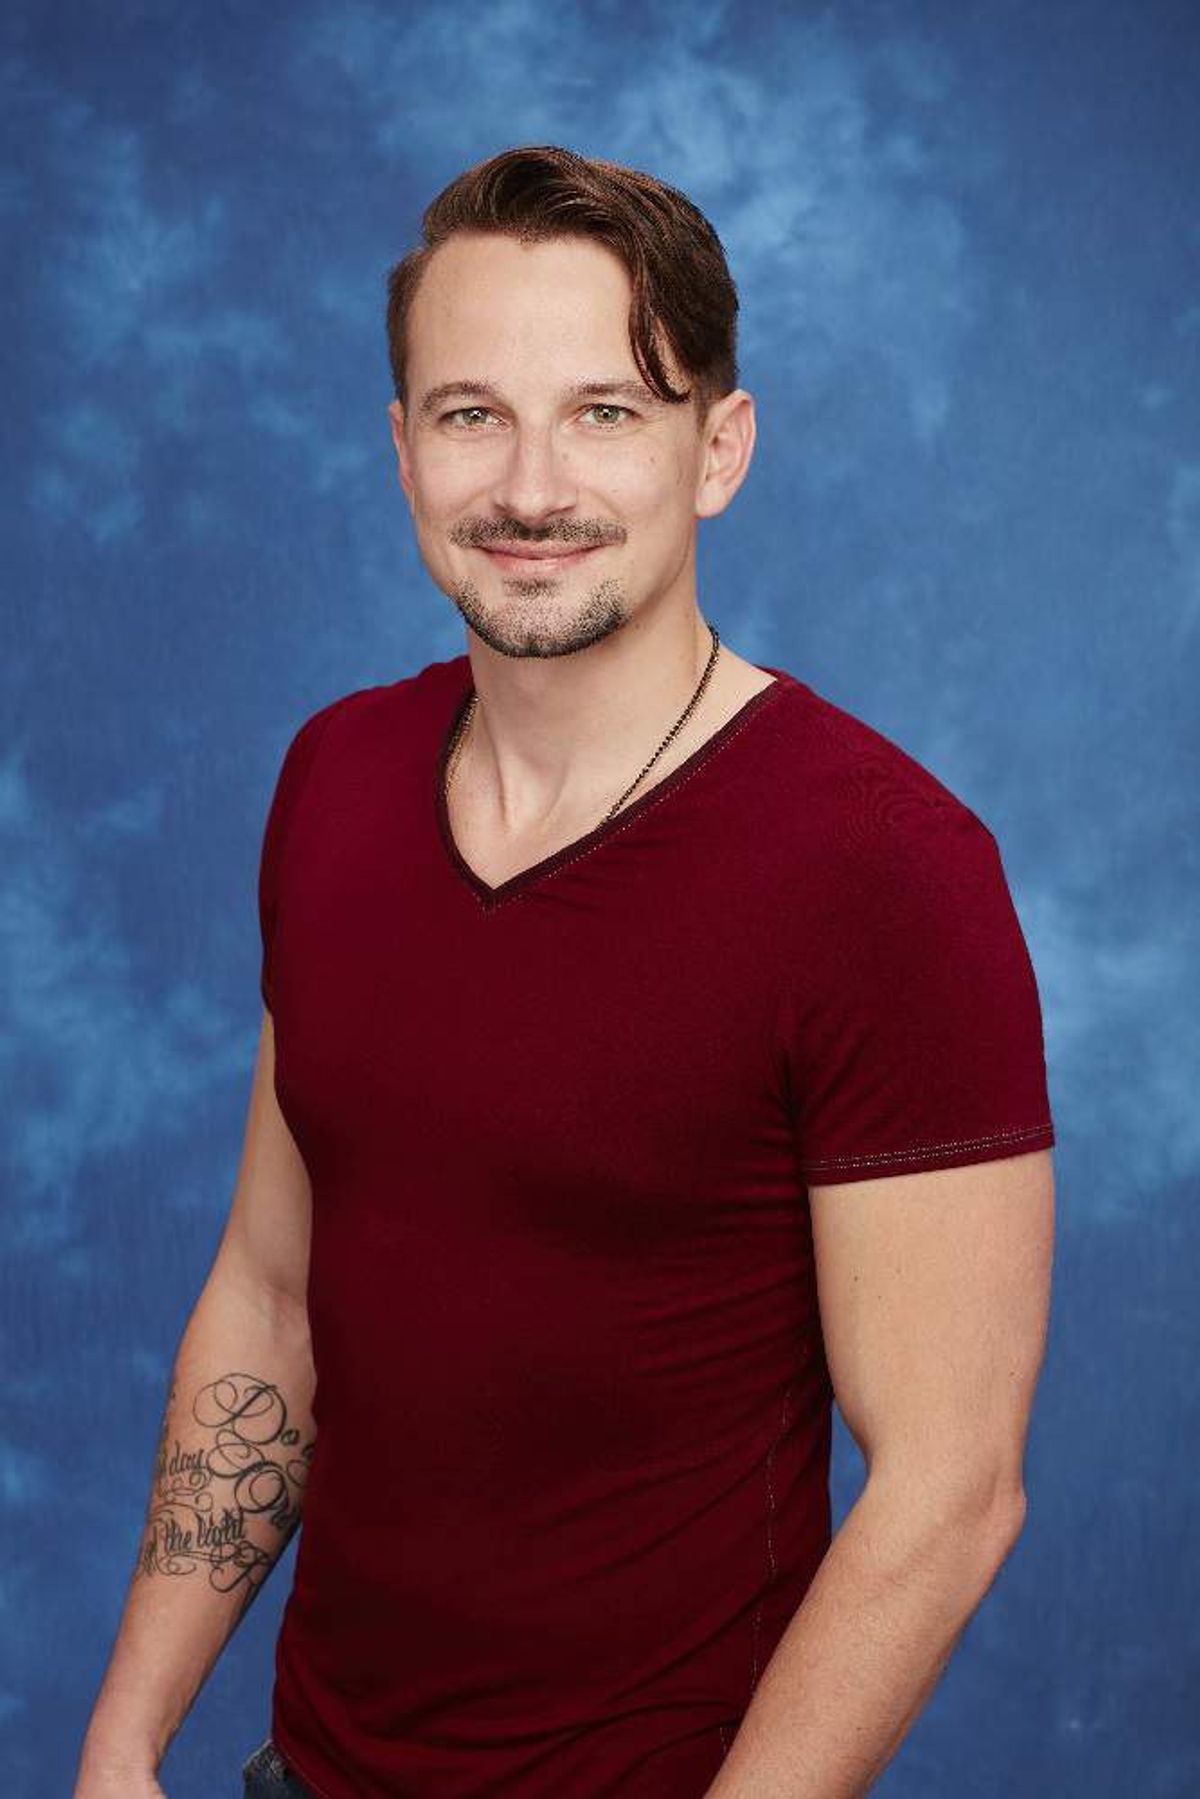 Six Best Evan Moments From The Bachelorette & Paradise